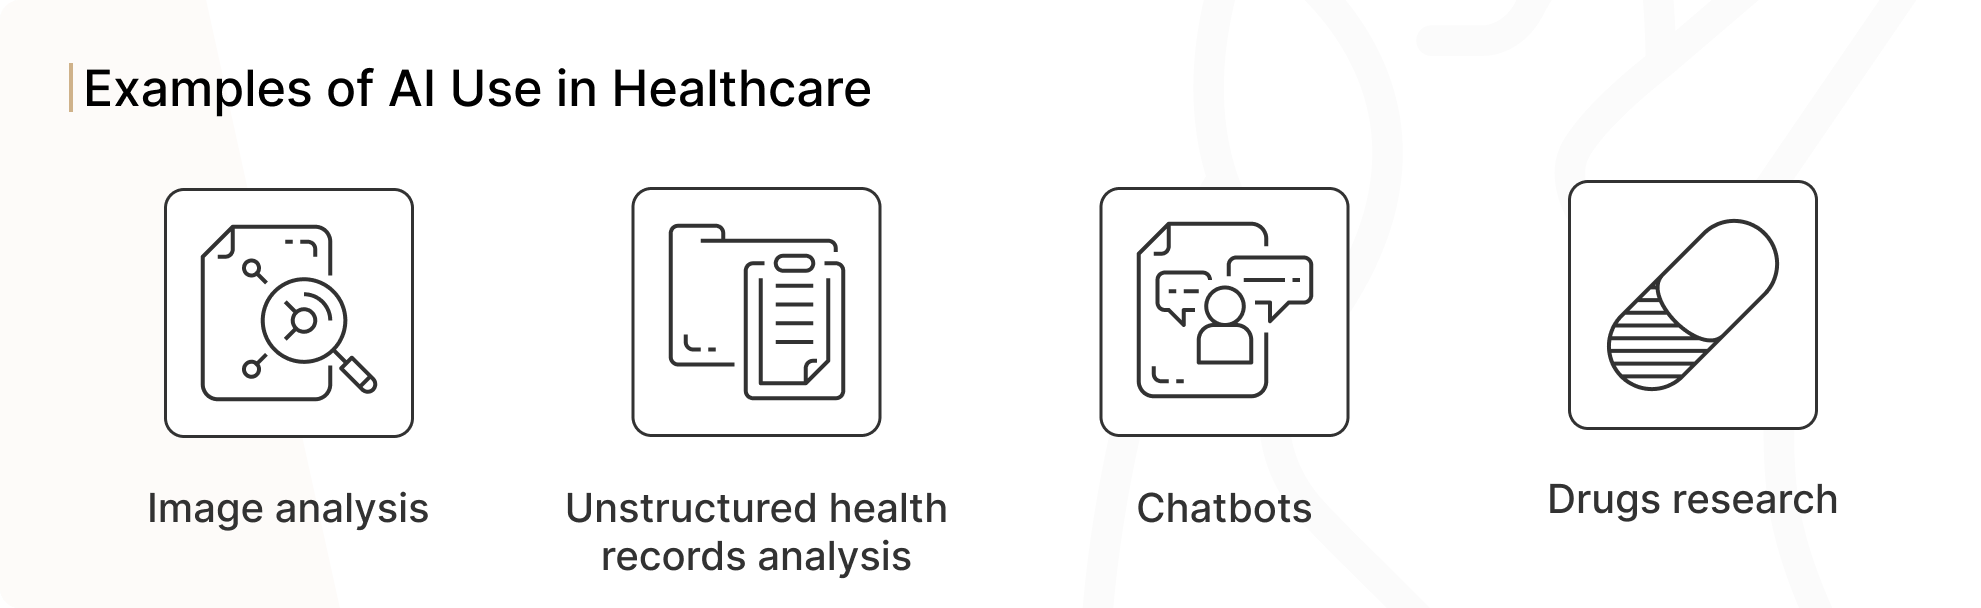 Examples of Use AI in Healthcare